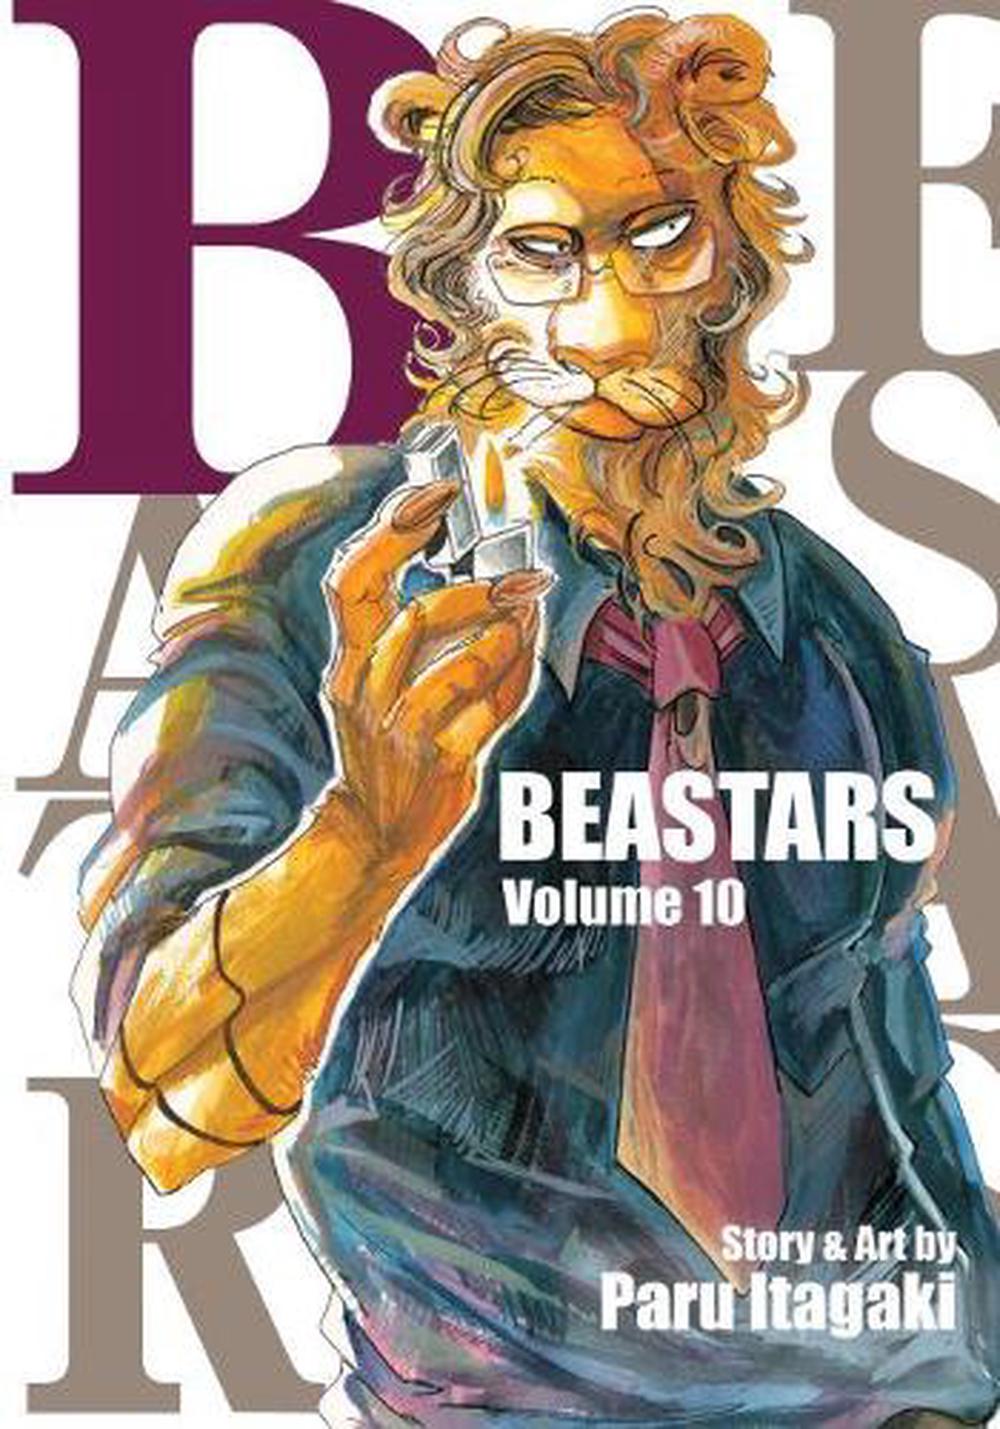 Beastars Vol 10 By Paru Itagaki Paperback Buy Online At The Nile